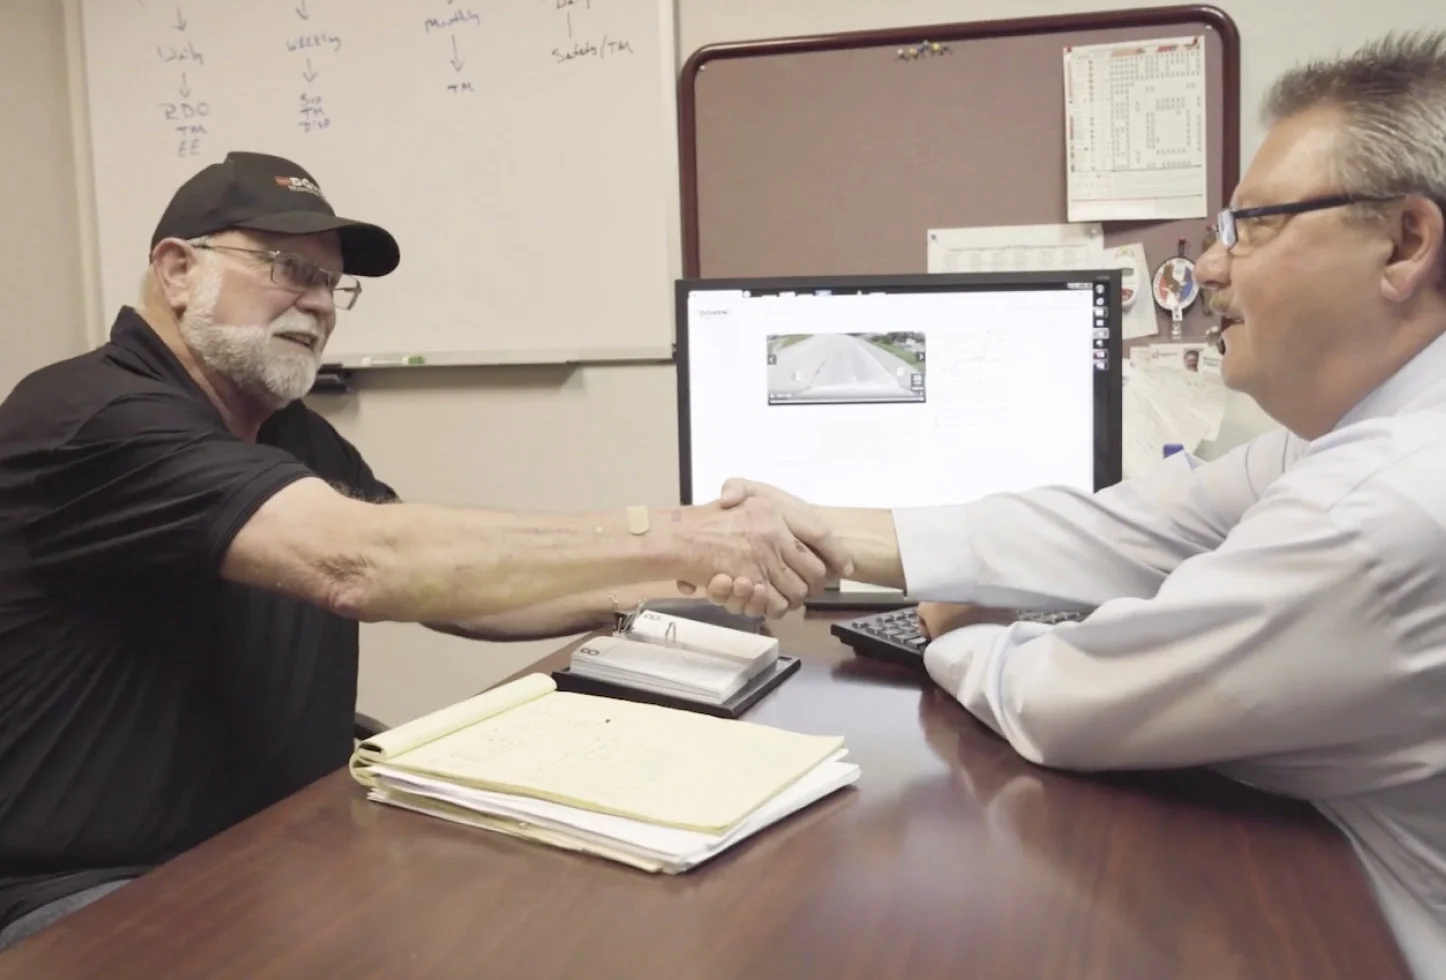 Video thumbnail of two men shaking hands across the table in front of a computer